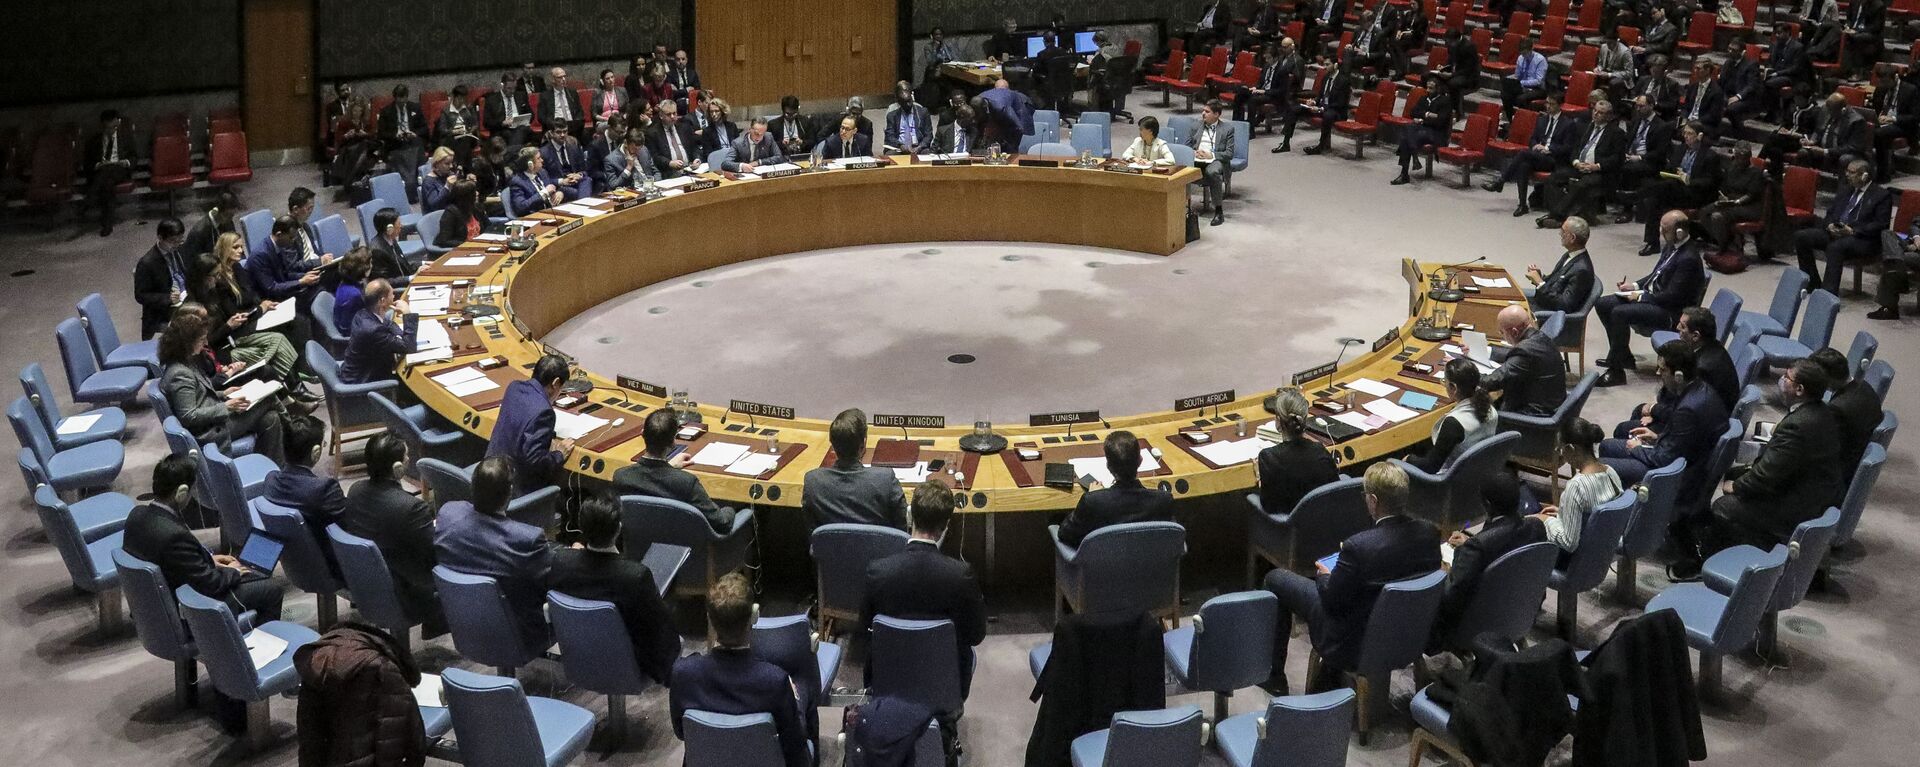 Members of the United Nations Security Council, with visiting German Foreign Minister Heiko Maas, convene a meeting on the nuclear non-proliferation treaty, Wednesday, Feb. 26, 2020, at U.N. headquarters - Sputnik International, 1920, 23.04.2021